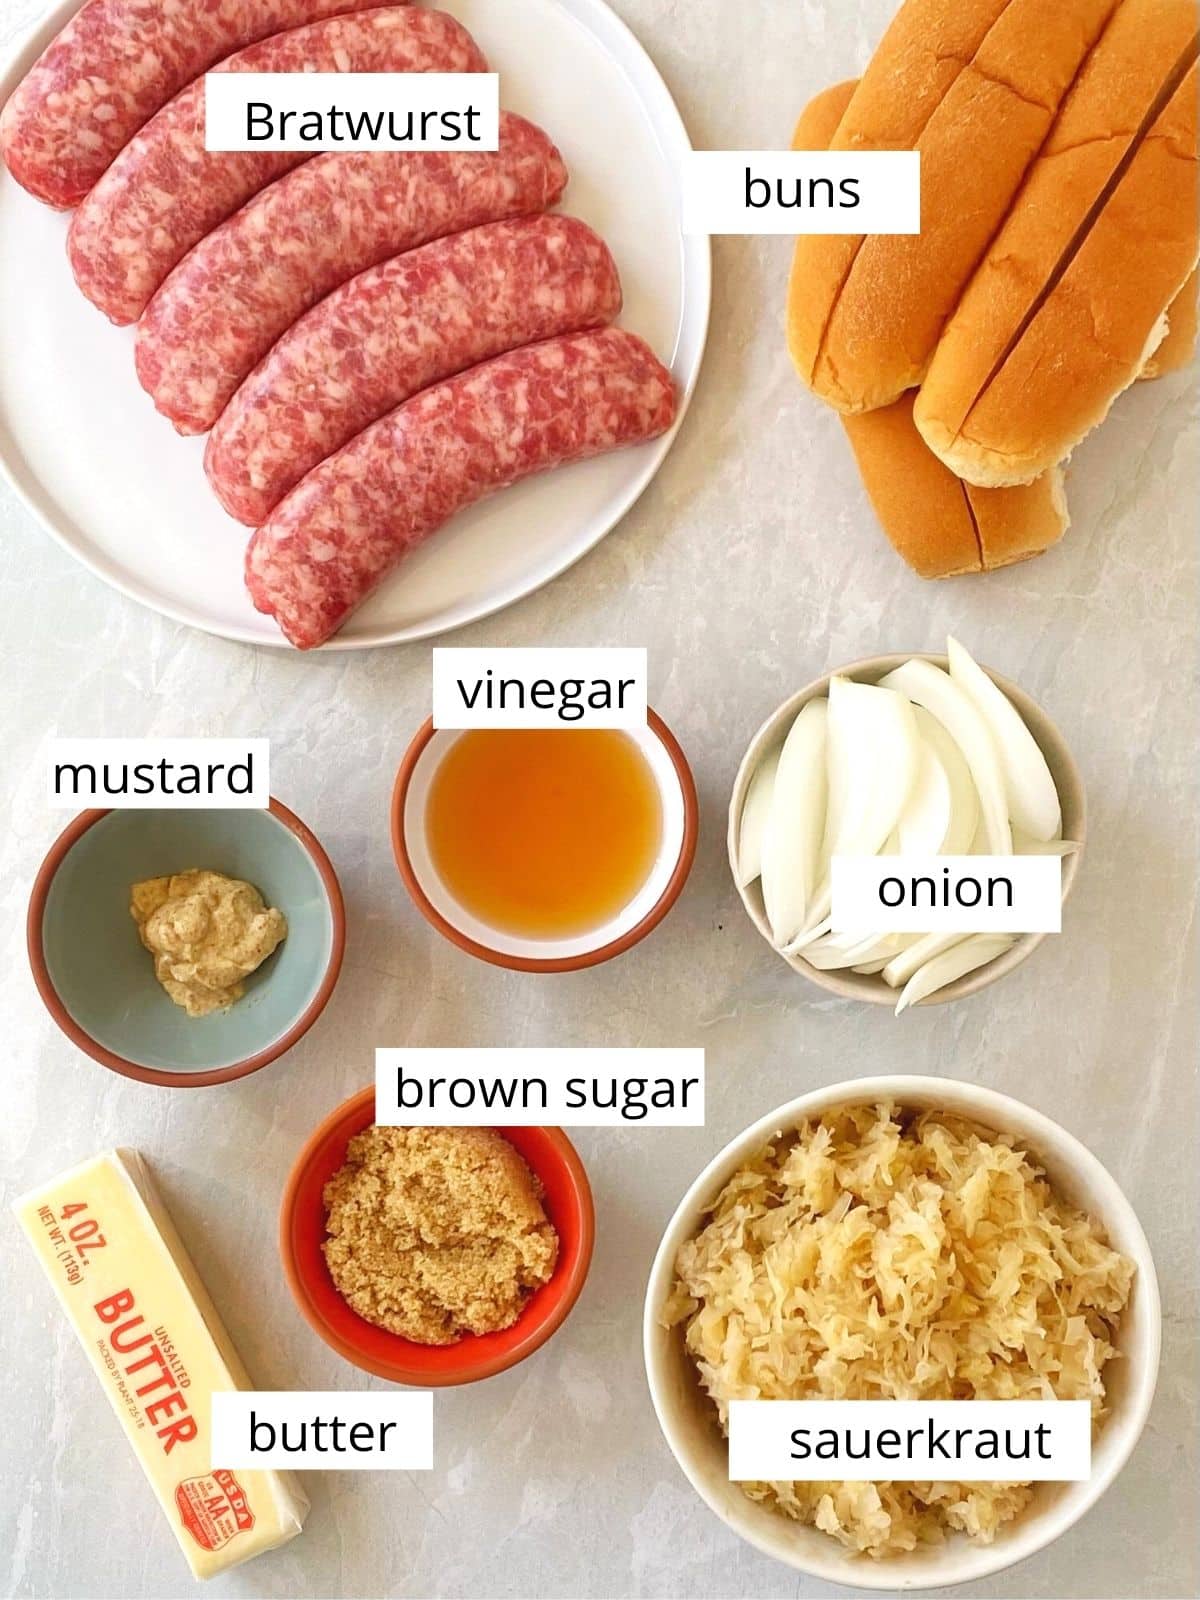 ingredients for brats and kraut.